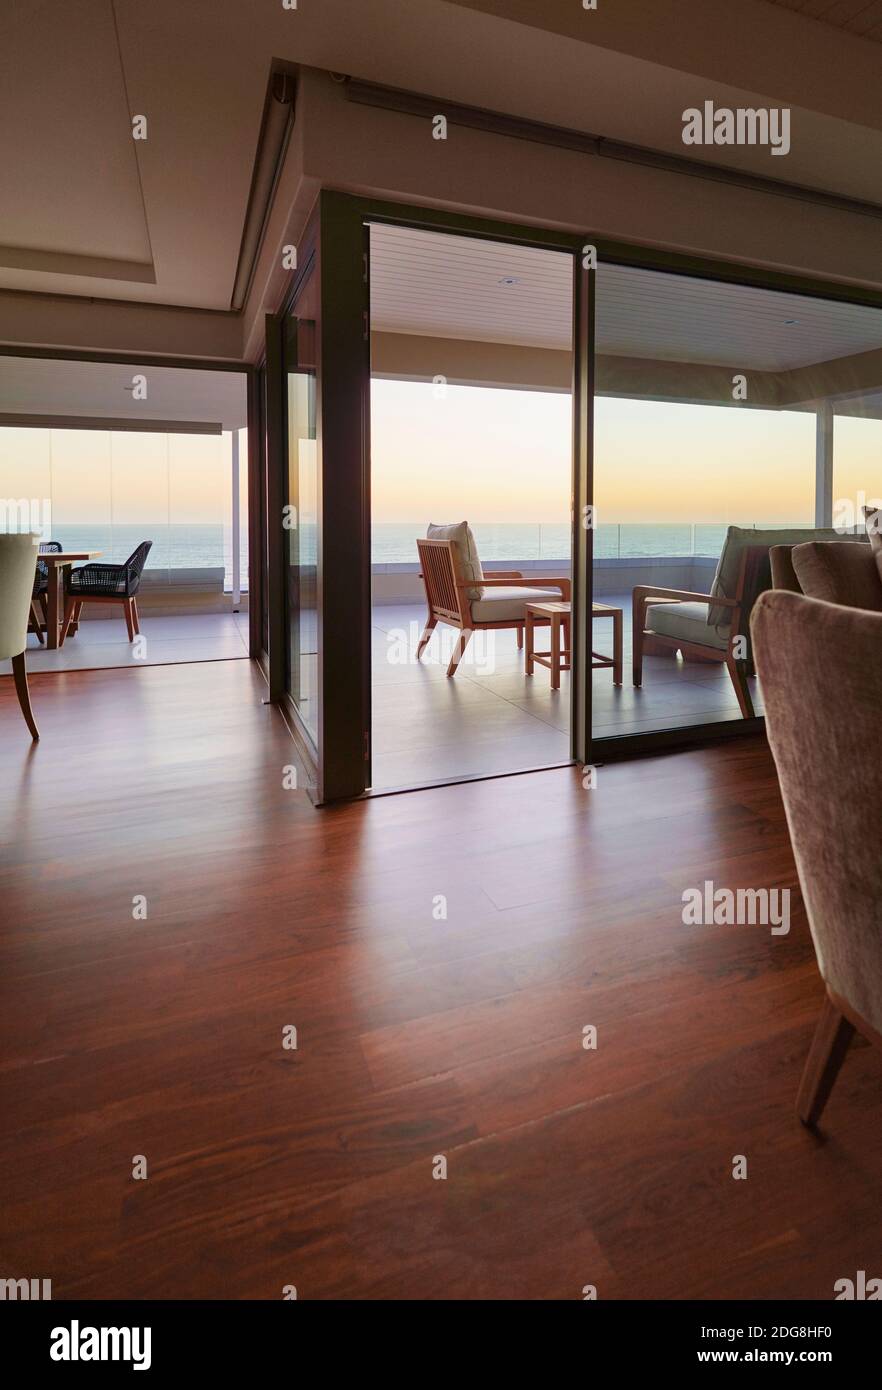 Hardwood floors in home showcase interior with sunset ocean view Stock Photo